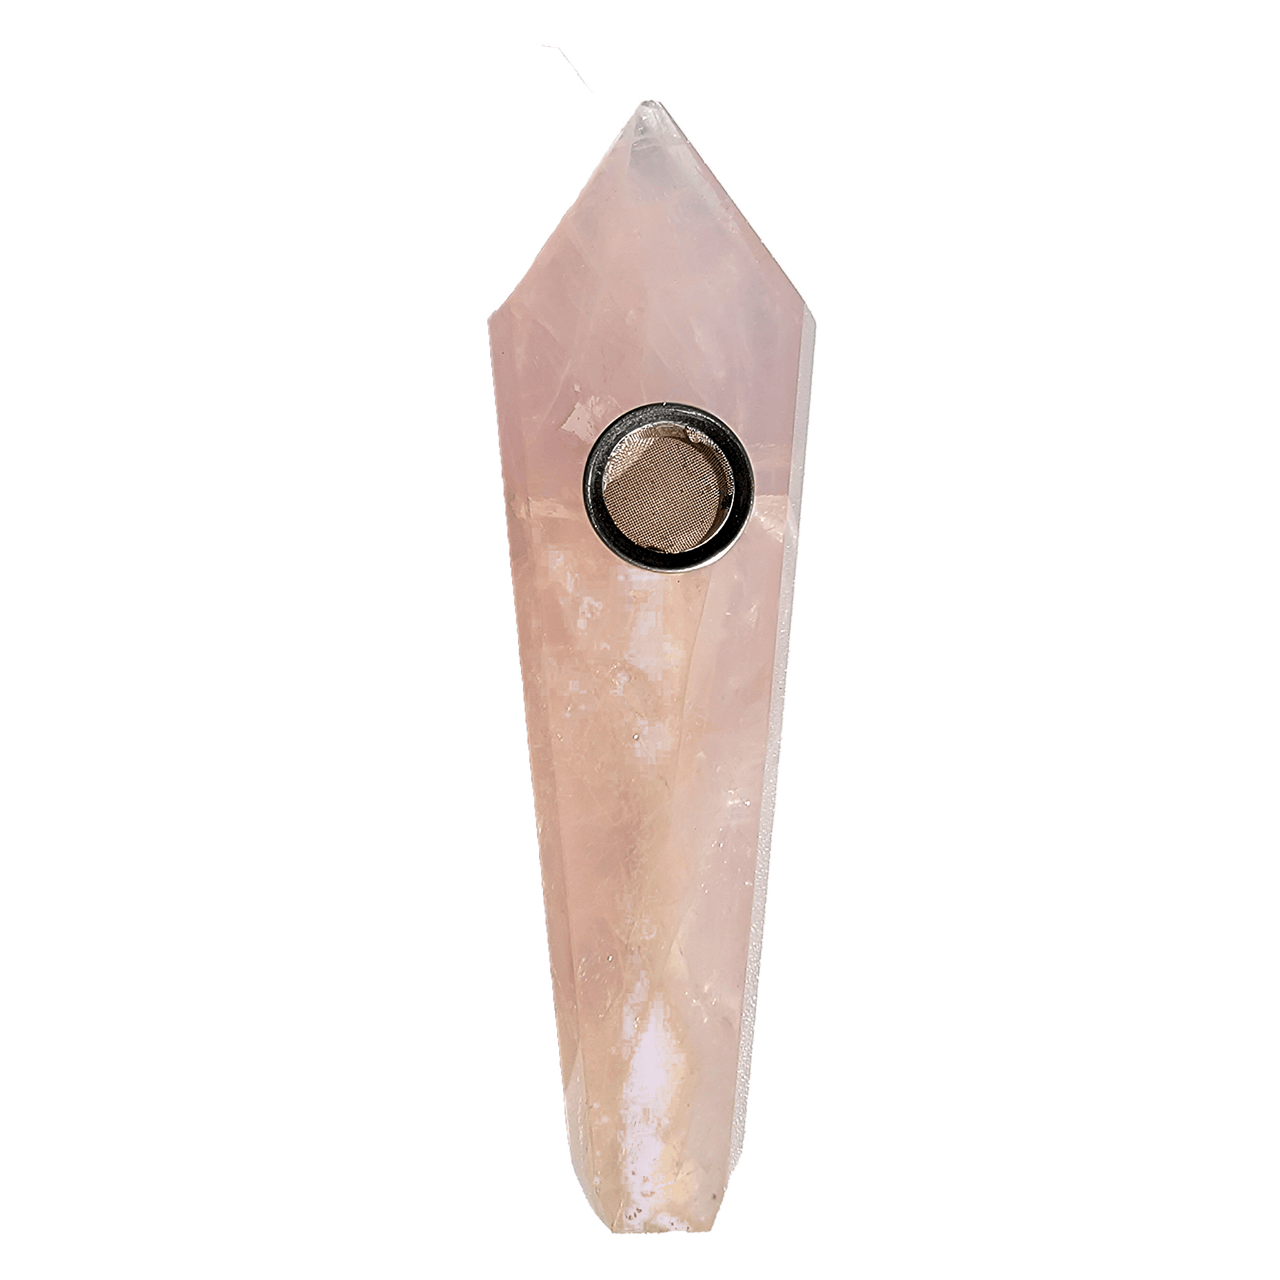 Cotton-Candy Rose Quartz Crystal Pipe. A rose quartz crystal pipe is one of the most beautiful of our selection. Goes well with amethyst, obsidian, and any variation of quartz crystal